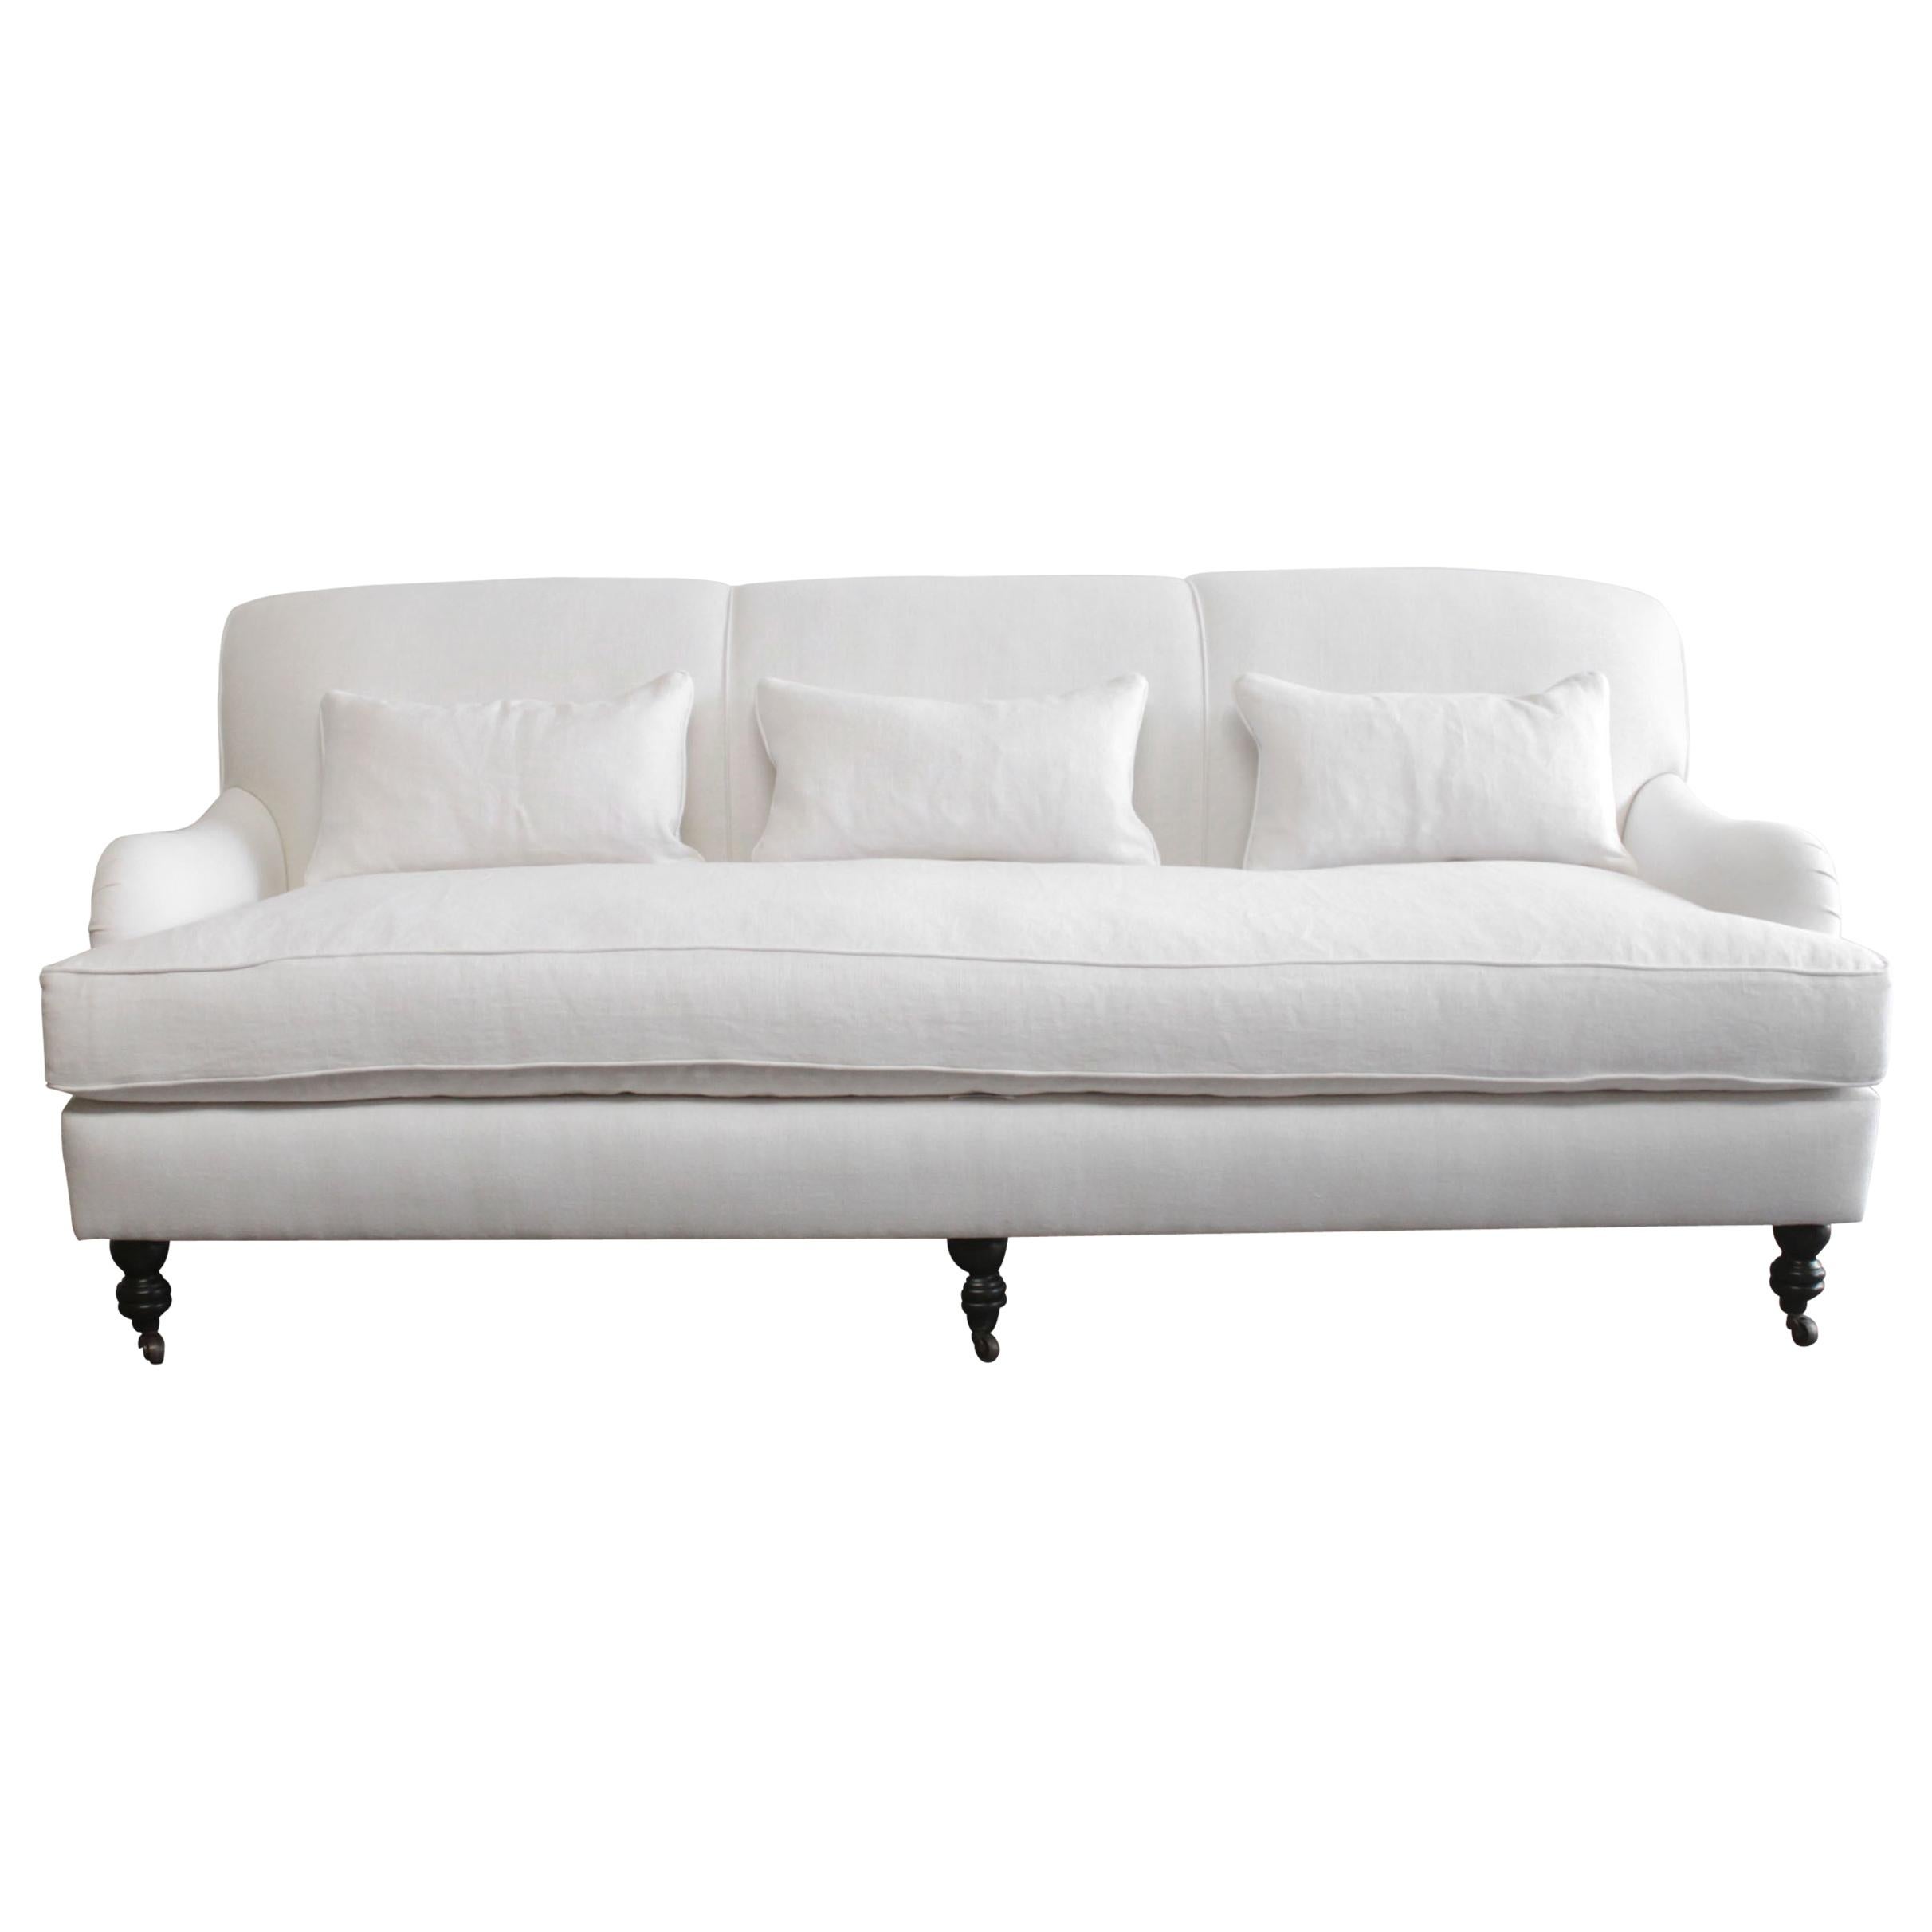 Custom LISTING FOR (A) White Linen English Arm Rolled Back Sofa with Casters